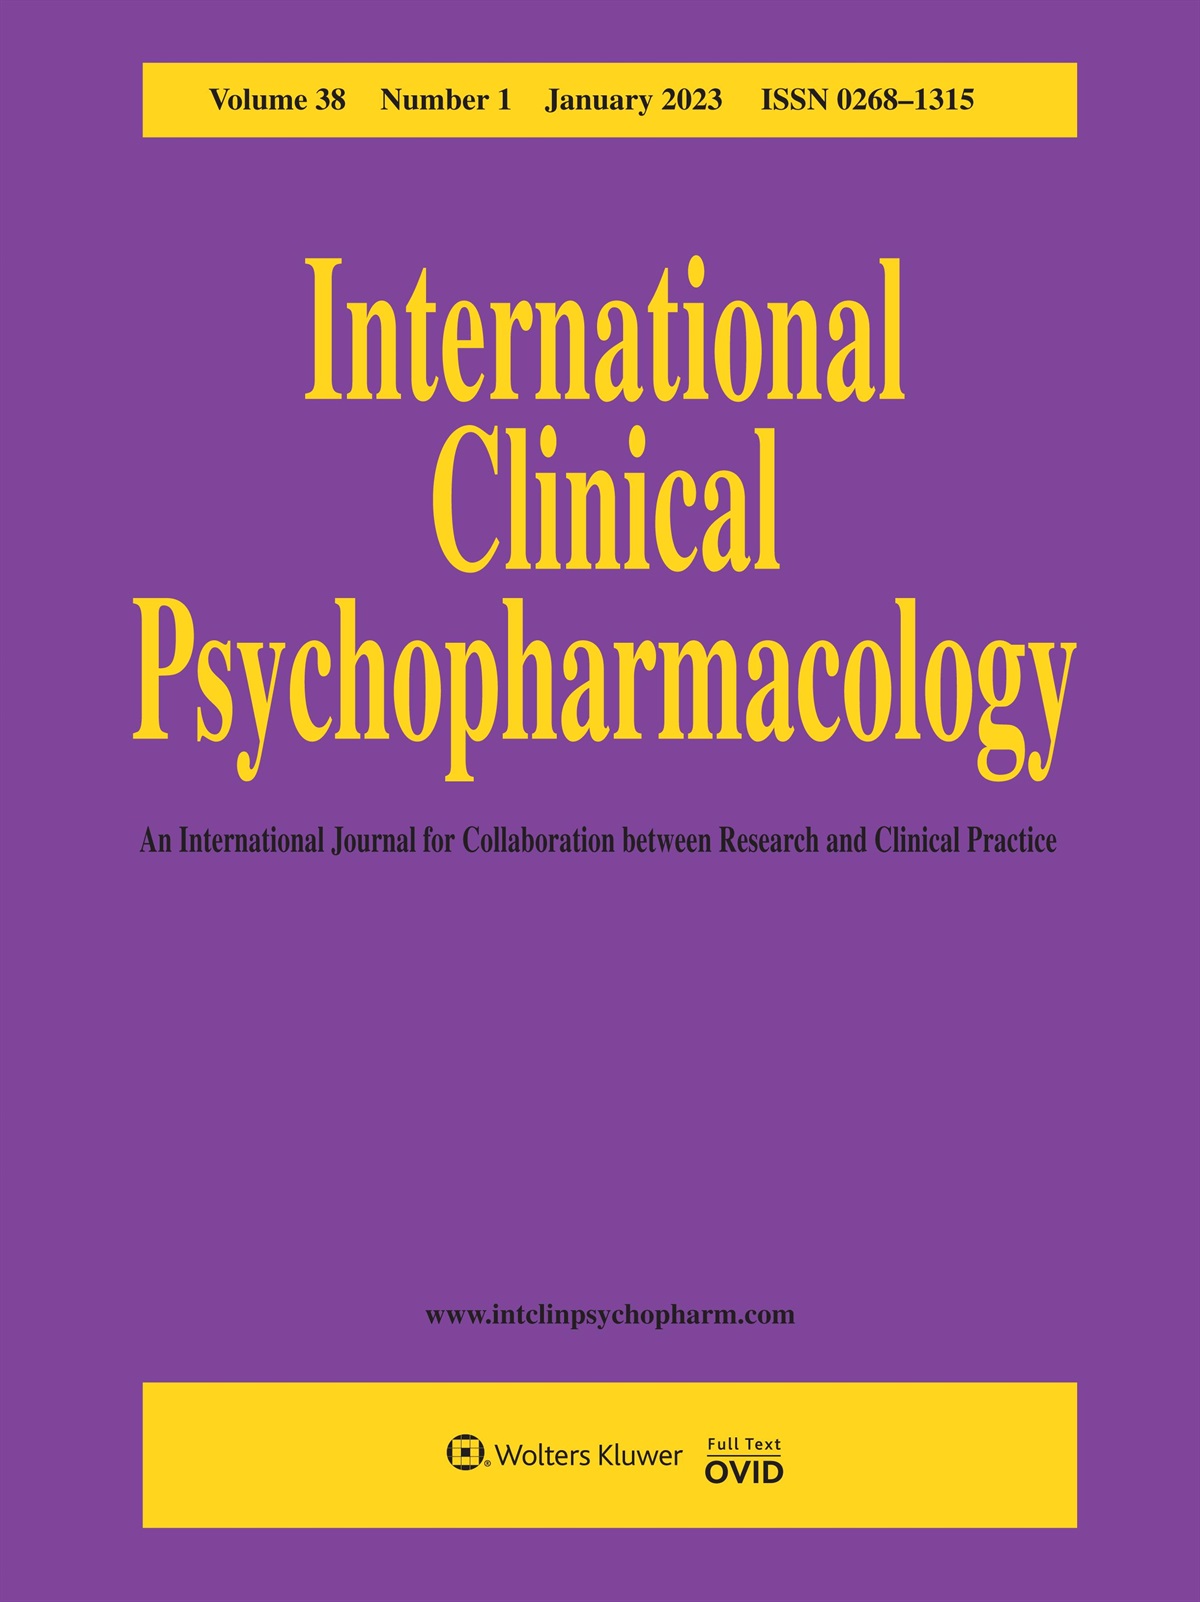 Fine-tuning of psychopharmacological treatments